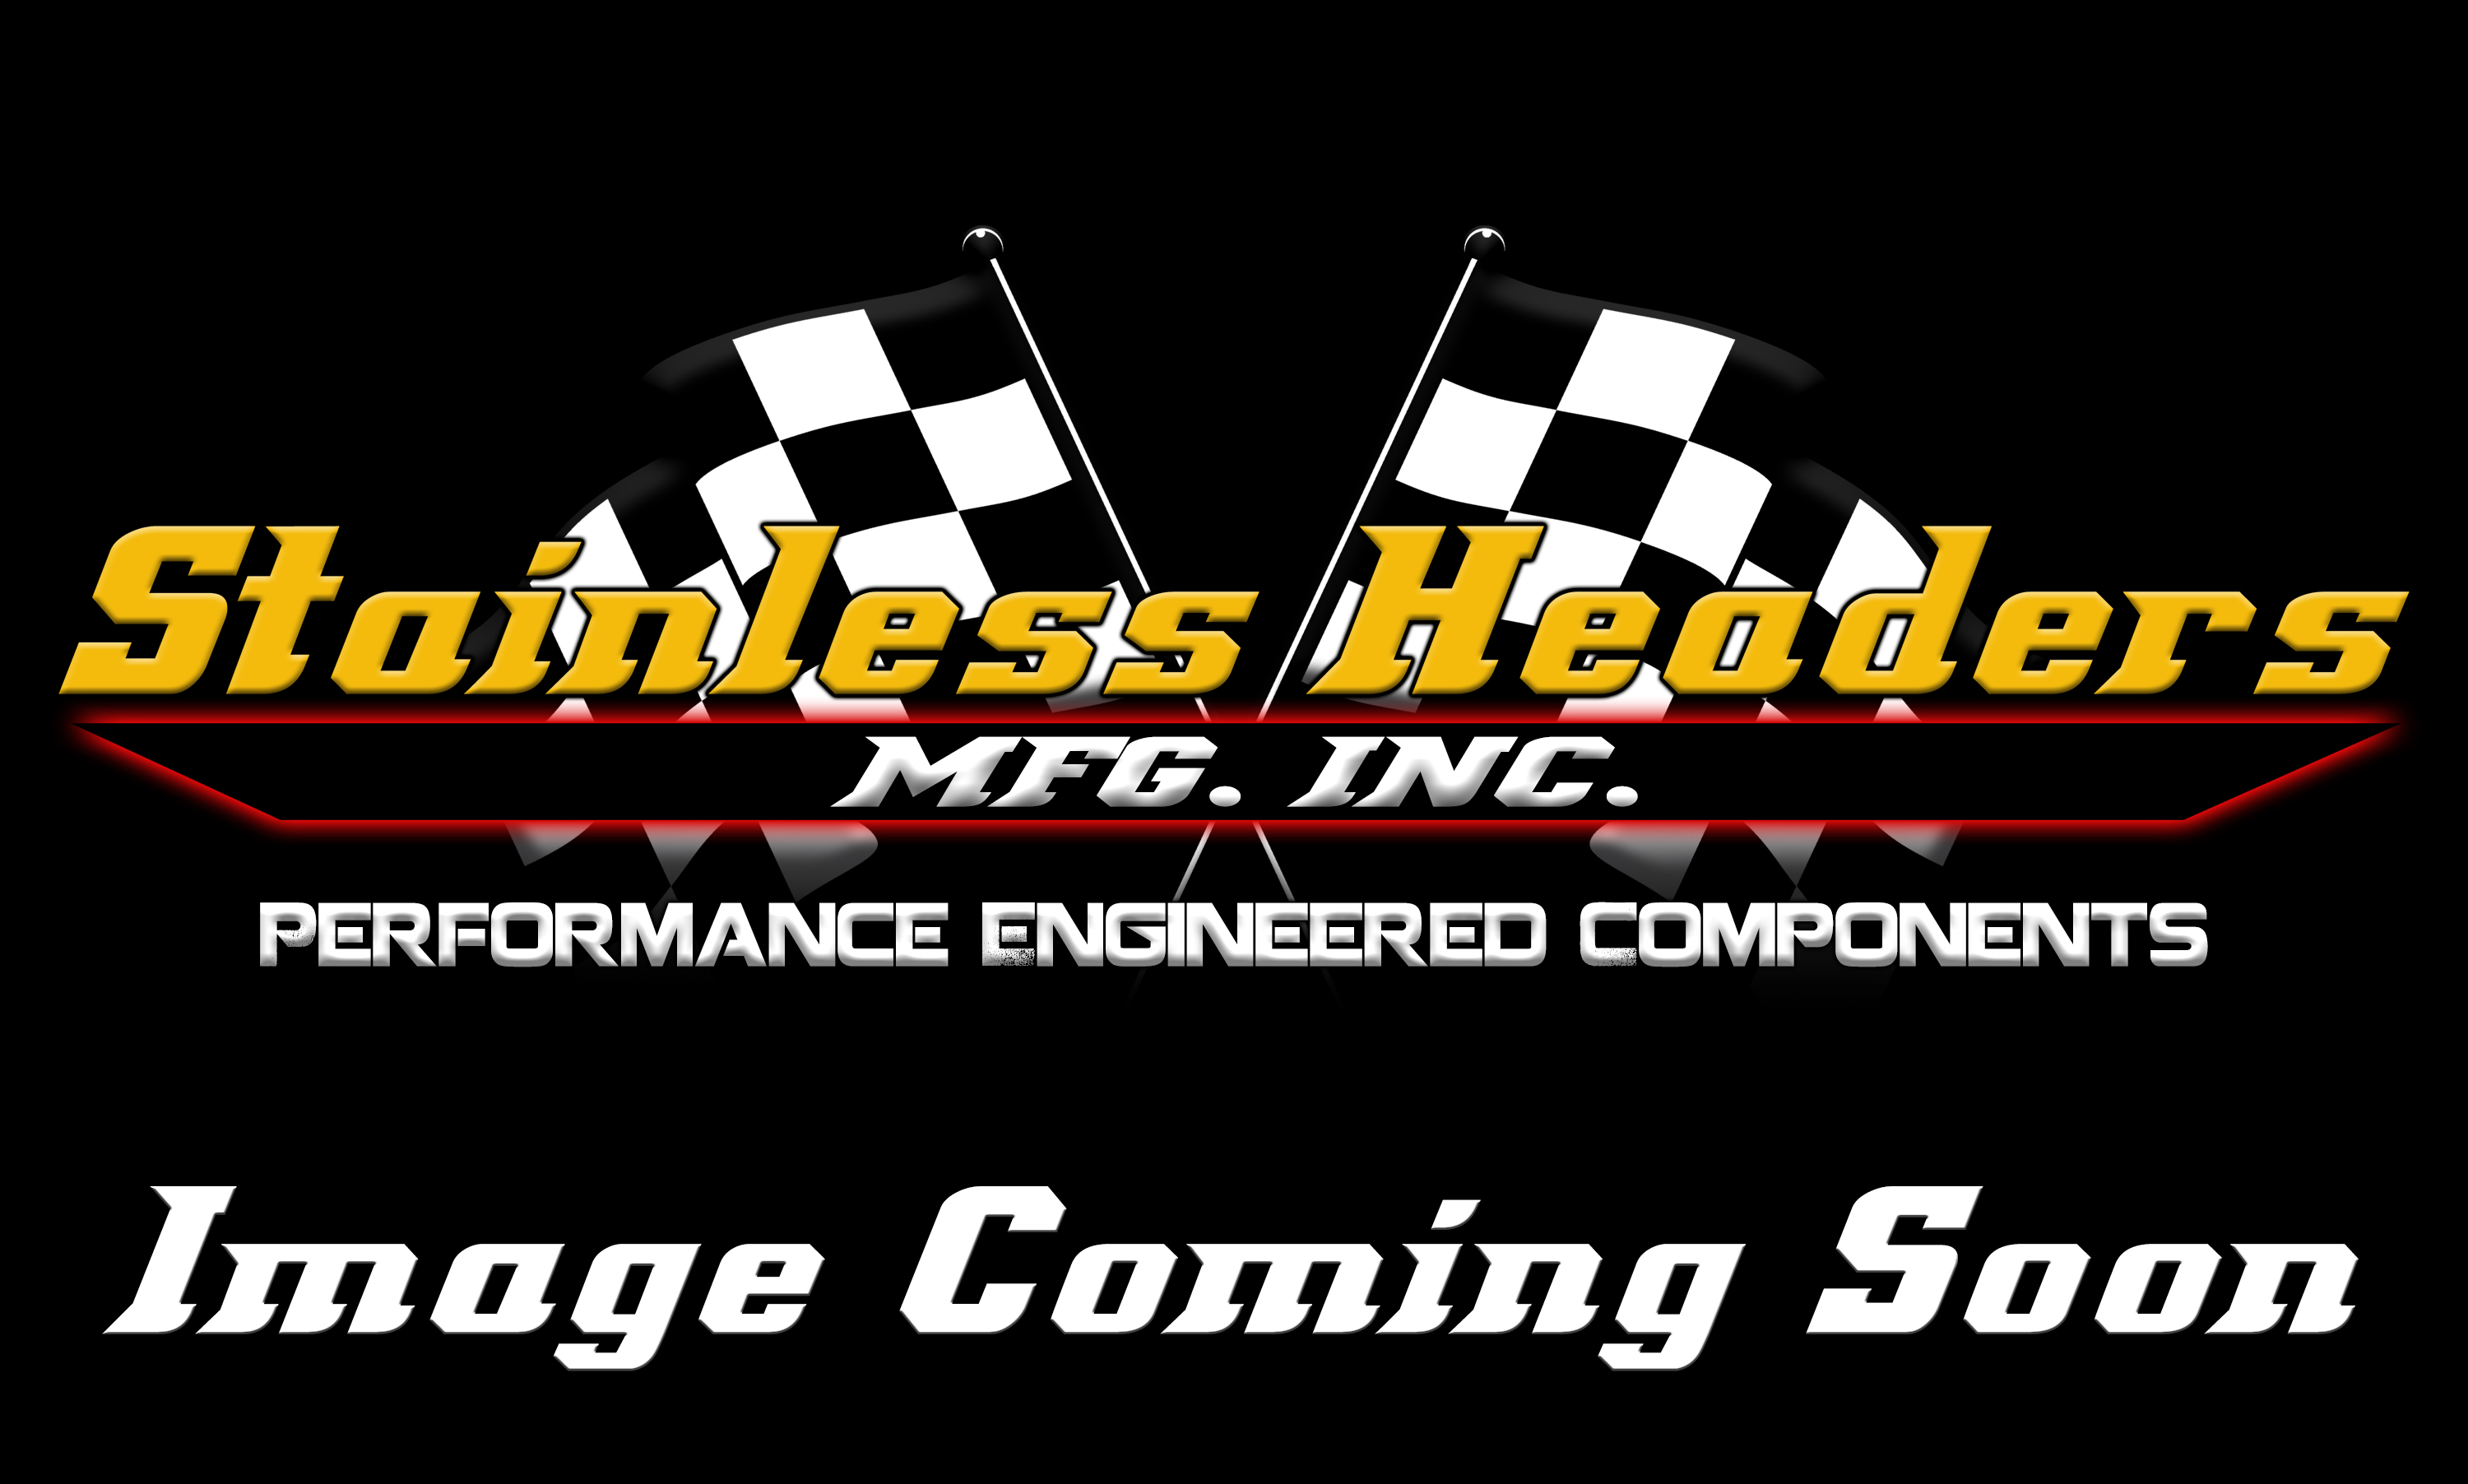 CompTurbo Technologies - CTR4518R-8388 Mid Frame 360 Journal Bearing Turbocharger (1500 HP)